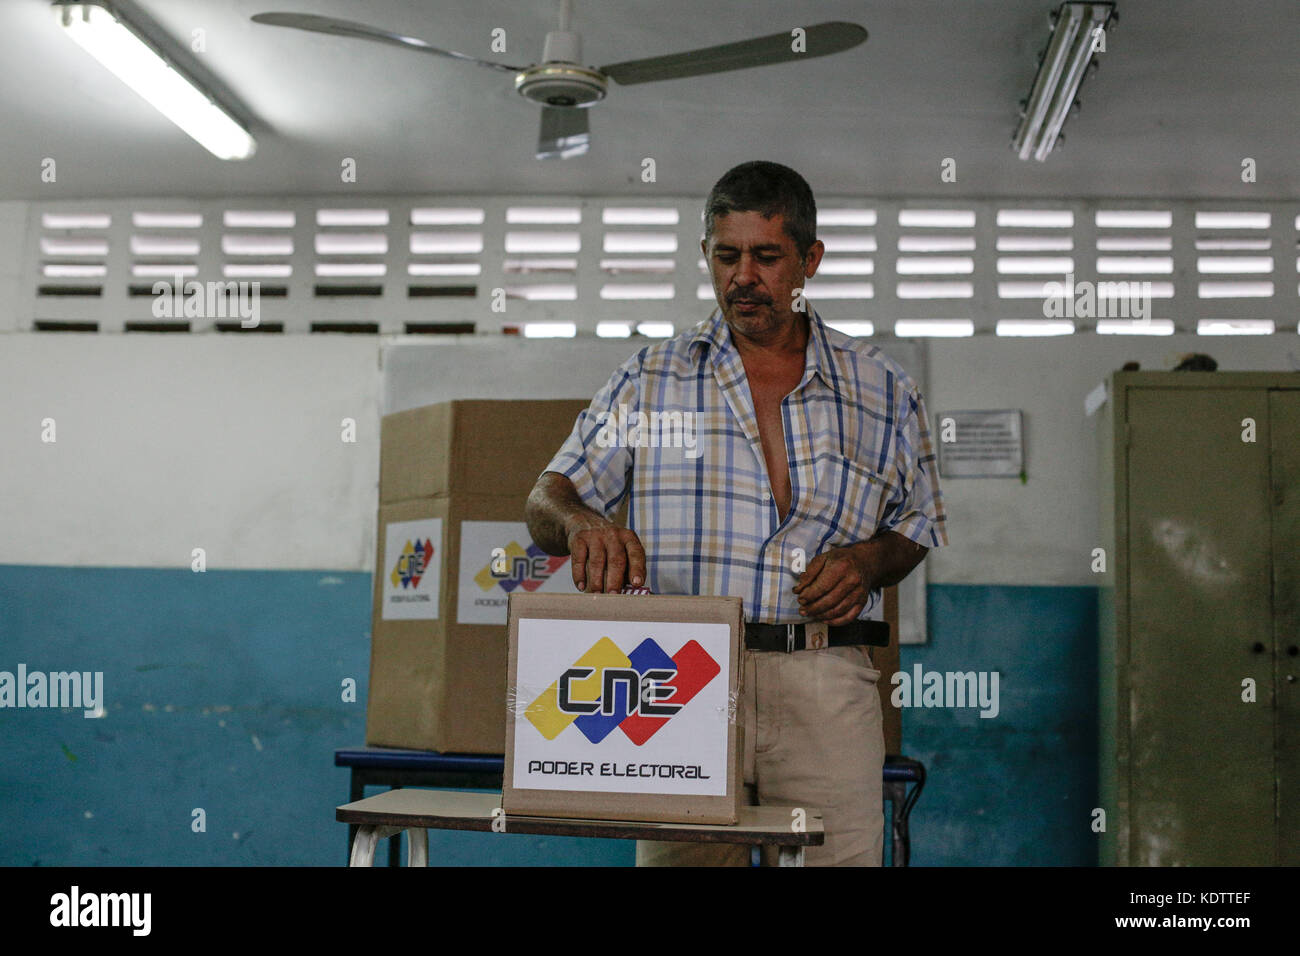 Miranda, Venezuela. 15th Oct, 2017. A man votes at a polling station in Miranda state, Venezuela, on Oct. 15, 2017. On Sunday, over 18 million Venezuelans are eligible to vote for 197 candidates running for the country's 23 governor posts. Credit: Boris Vergara/Xinhua/Alamy Live News Stock Photo